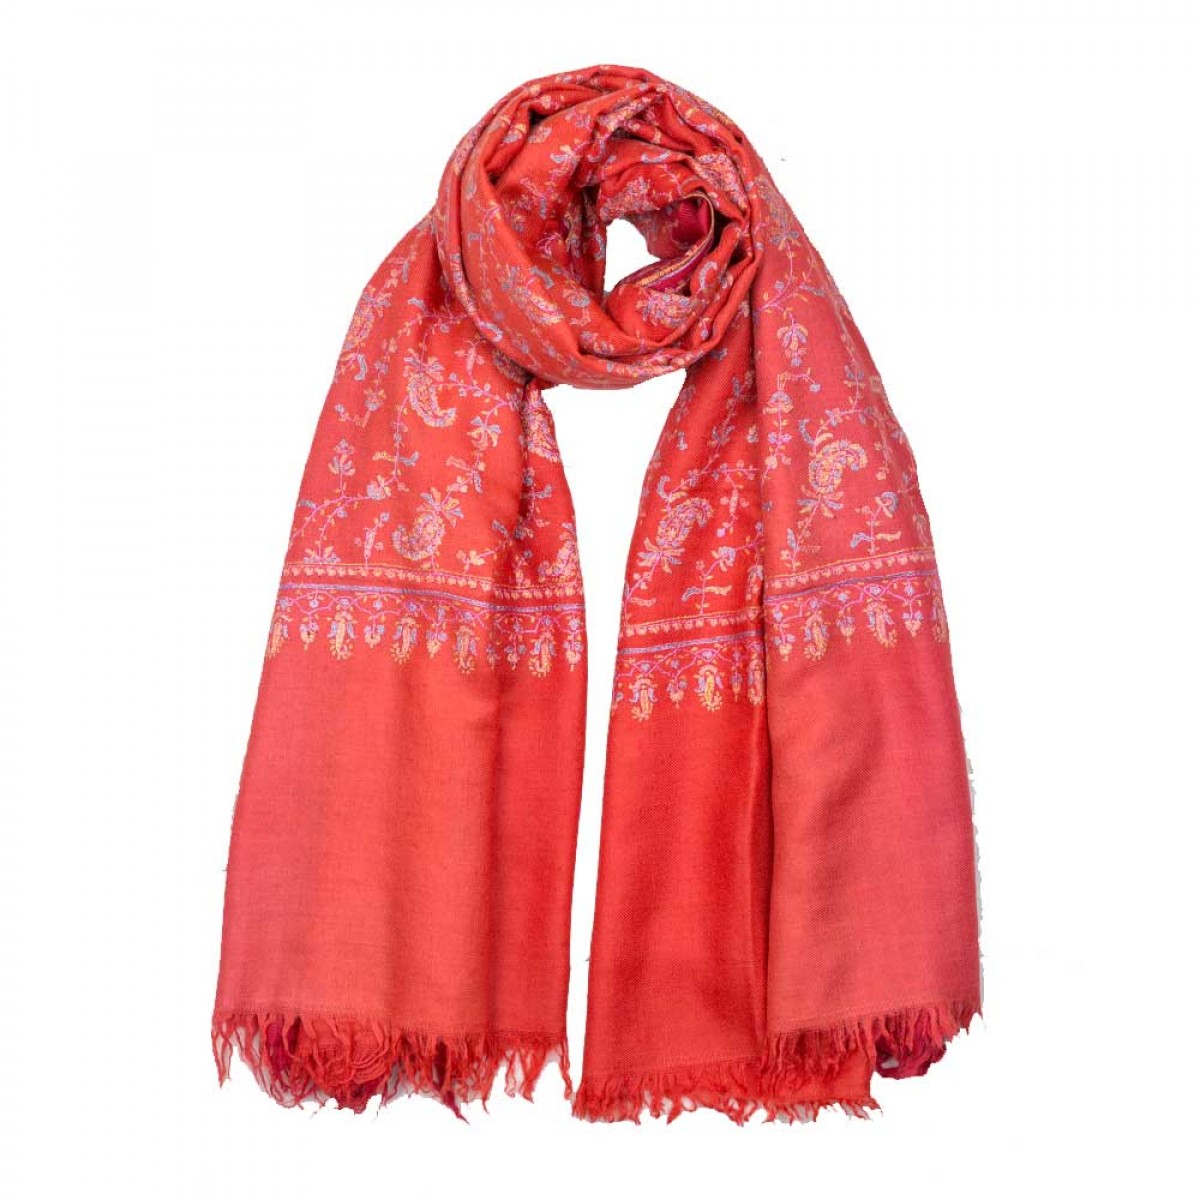 Embroidered Pashmina Shawls - Ombre Red